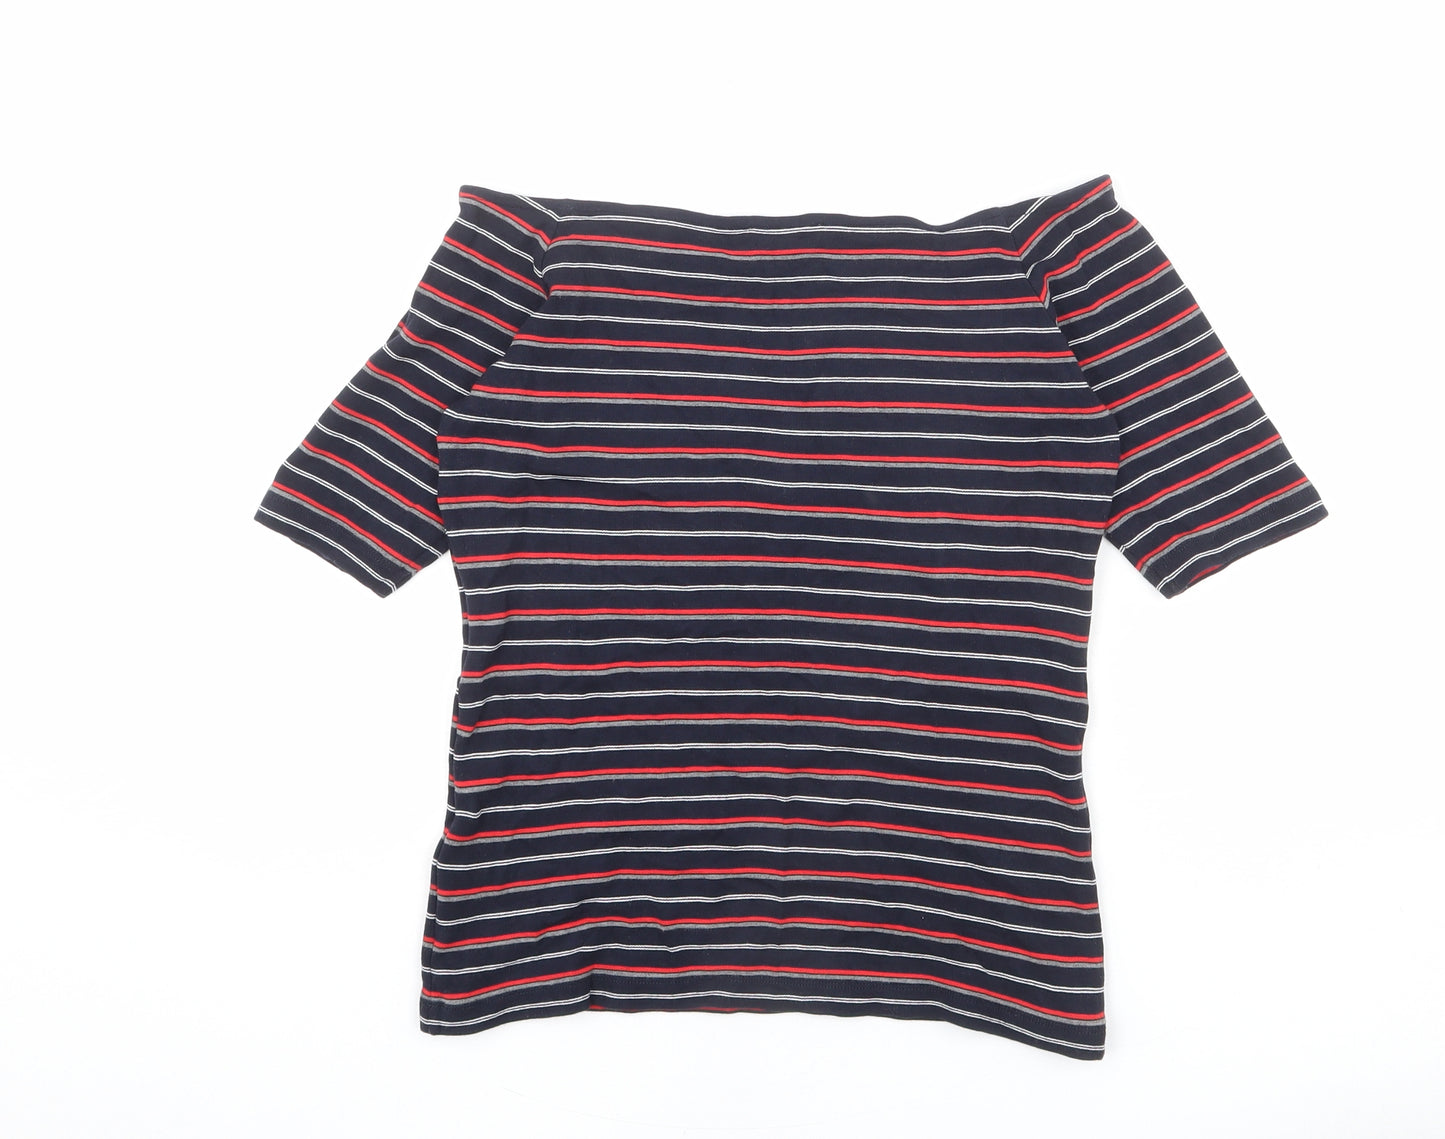 Whistles Womens Multicoloured Striped Viscose Basic T-Shirt Size 14 Off the Shoulder